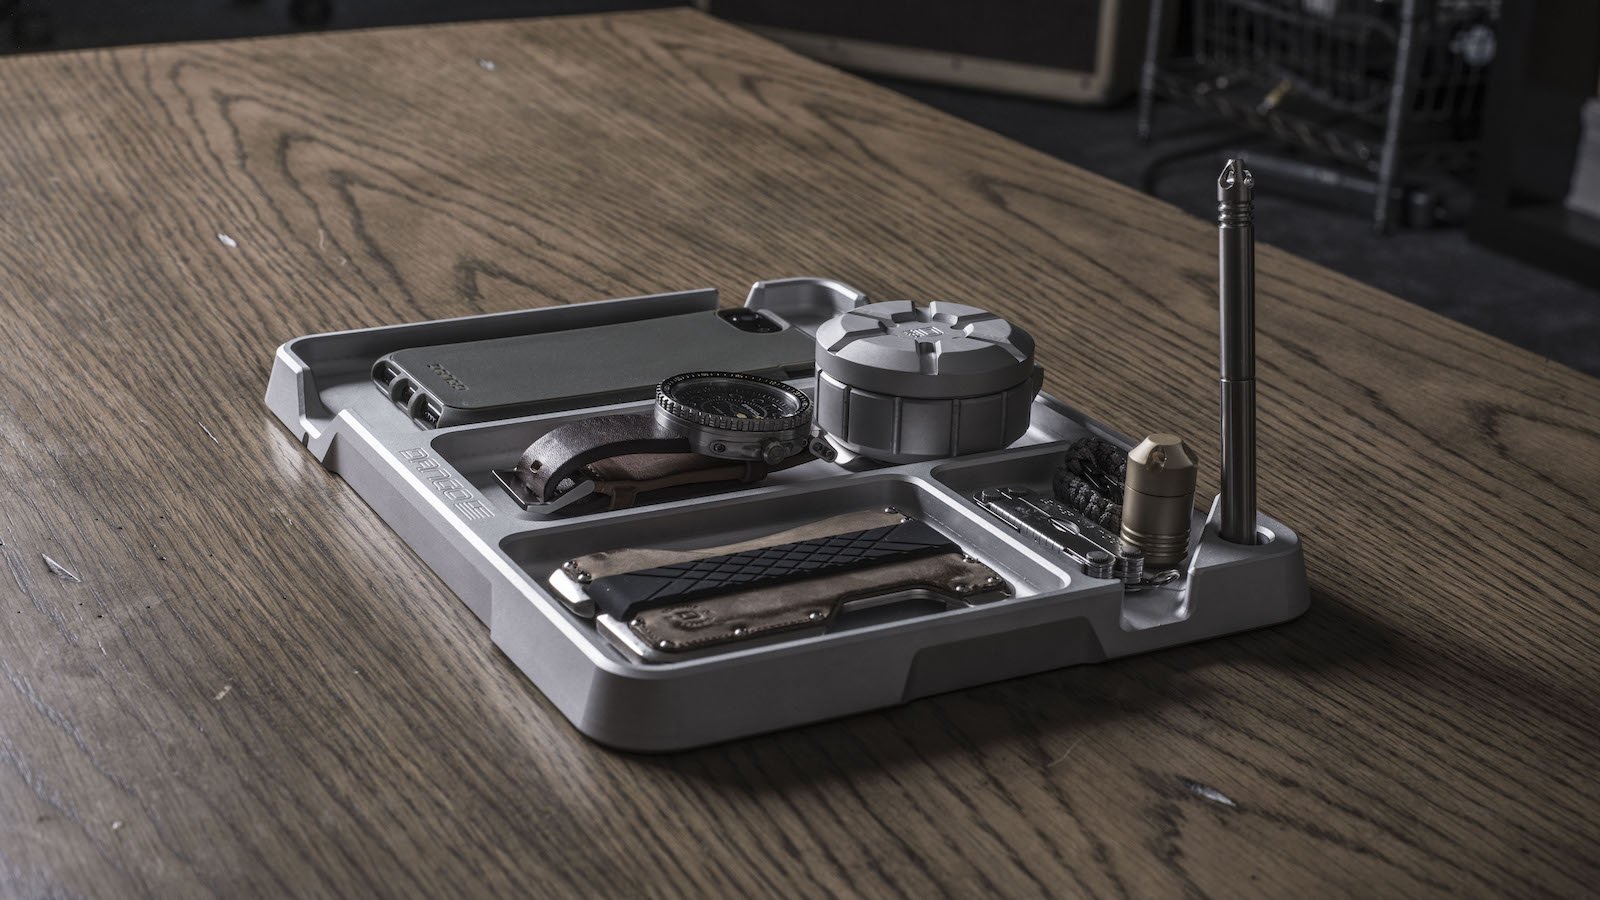 Dango Products EDC Tray with DTEX Pads keeps your everyday carry items organized